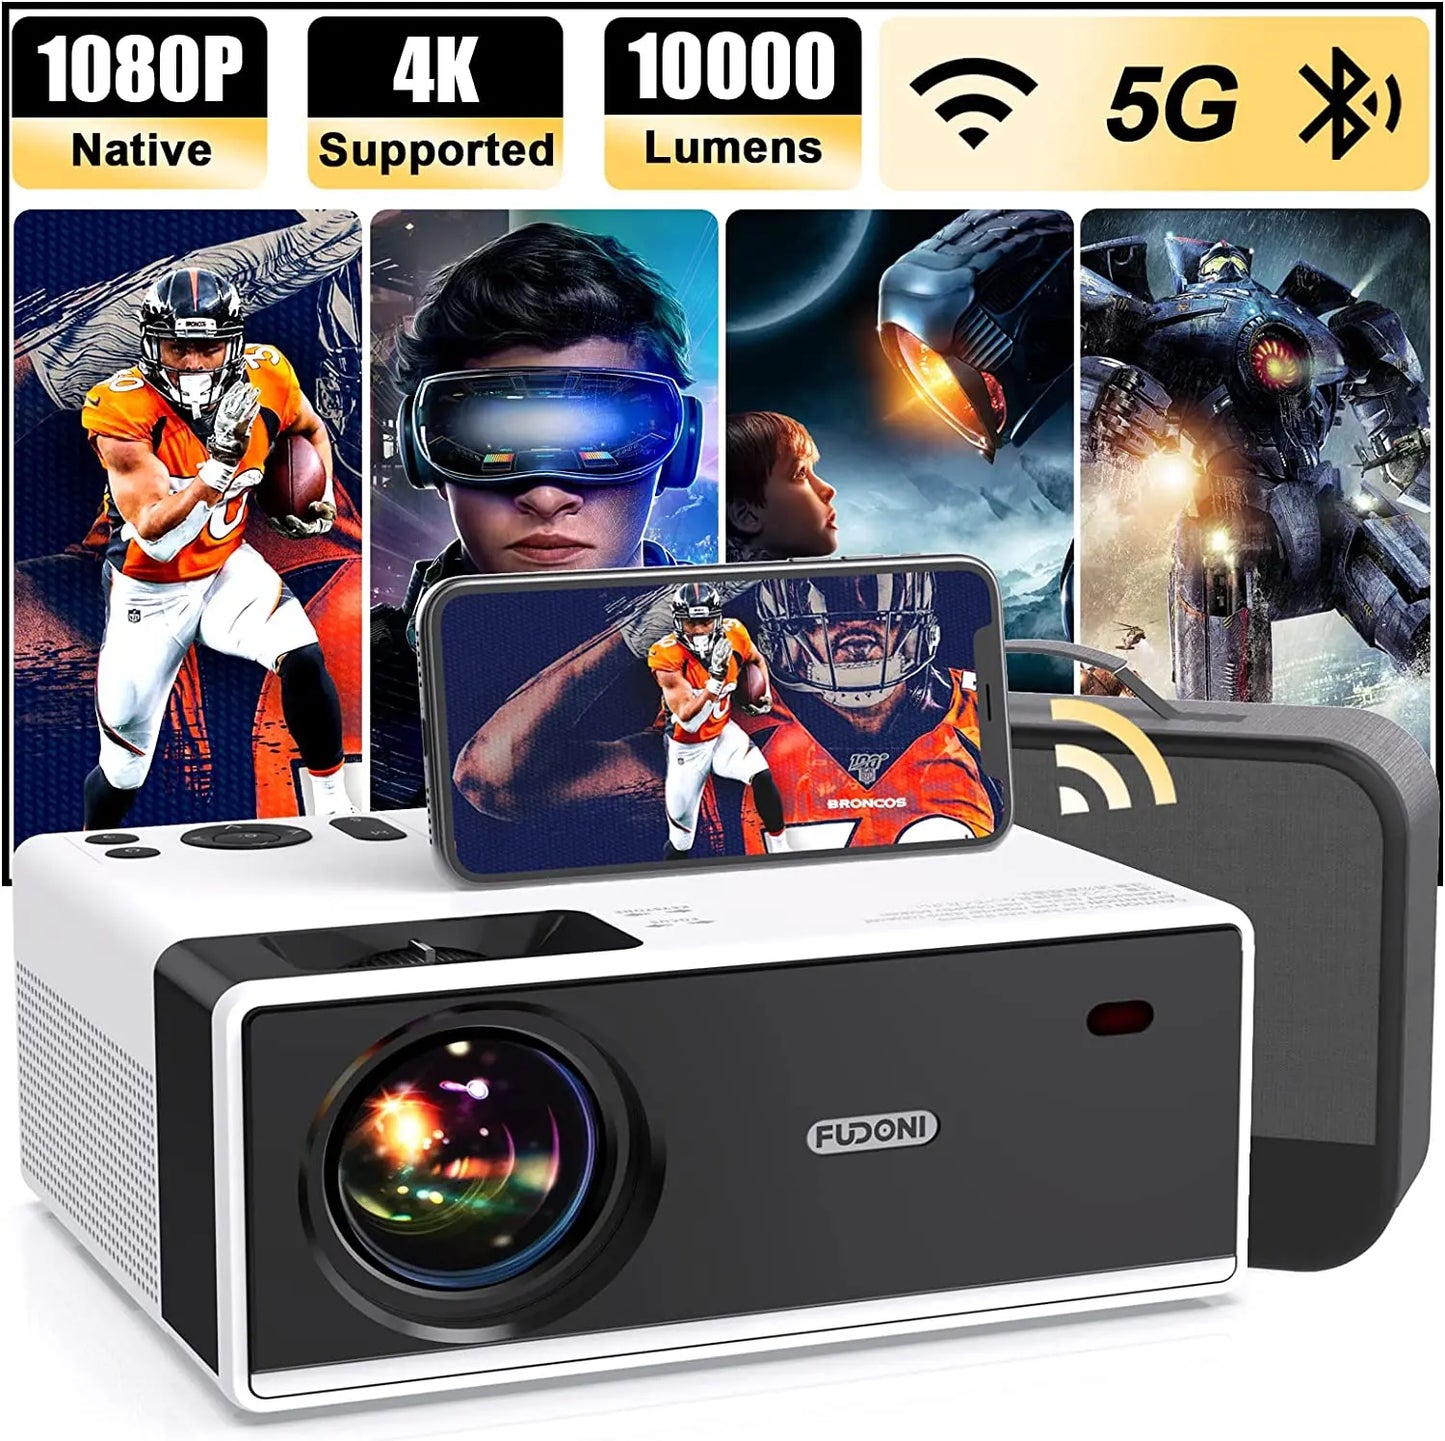 Projector with WiFi and Bluetooth, 5G WiFi Projector 4K Supported Nati –  FUDONI